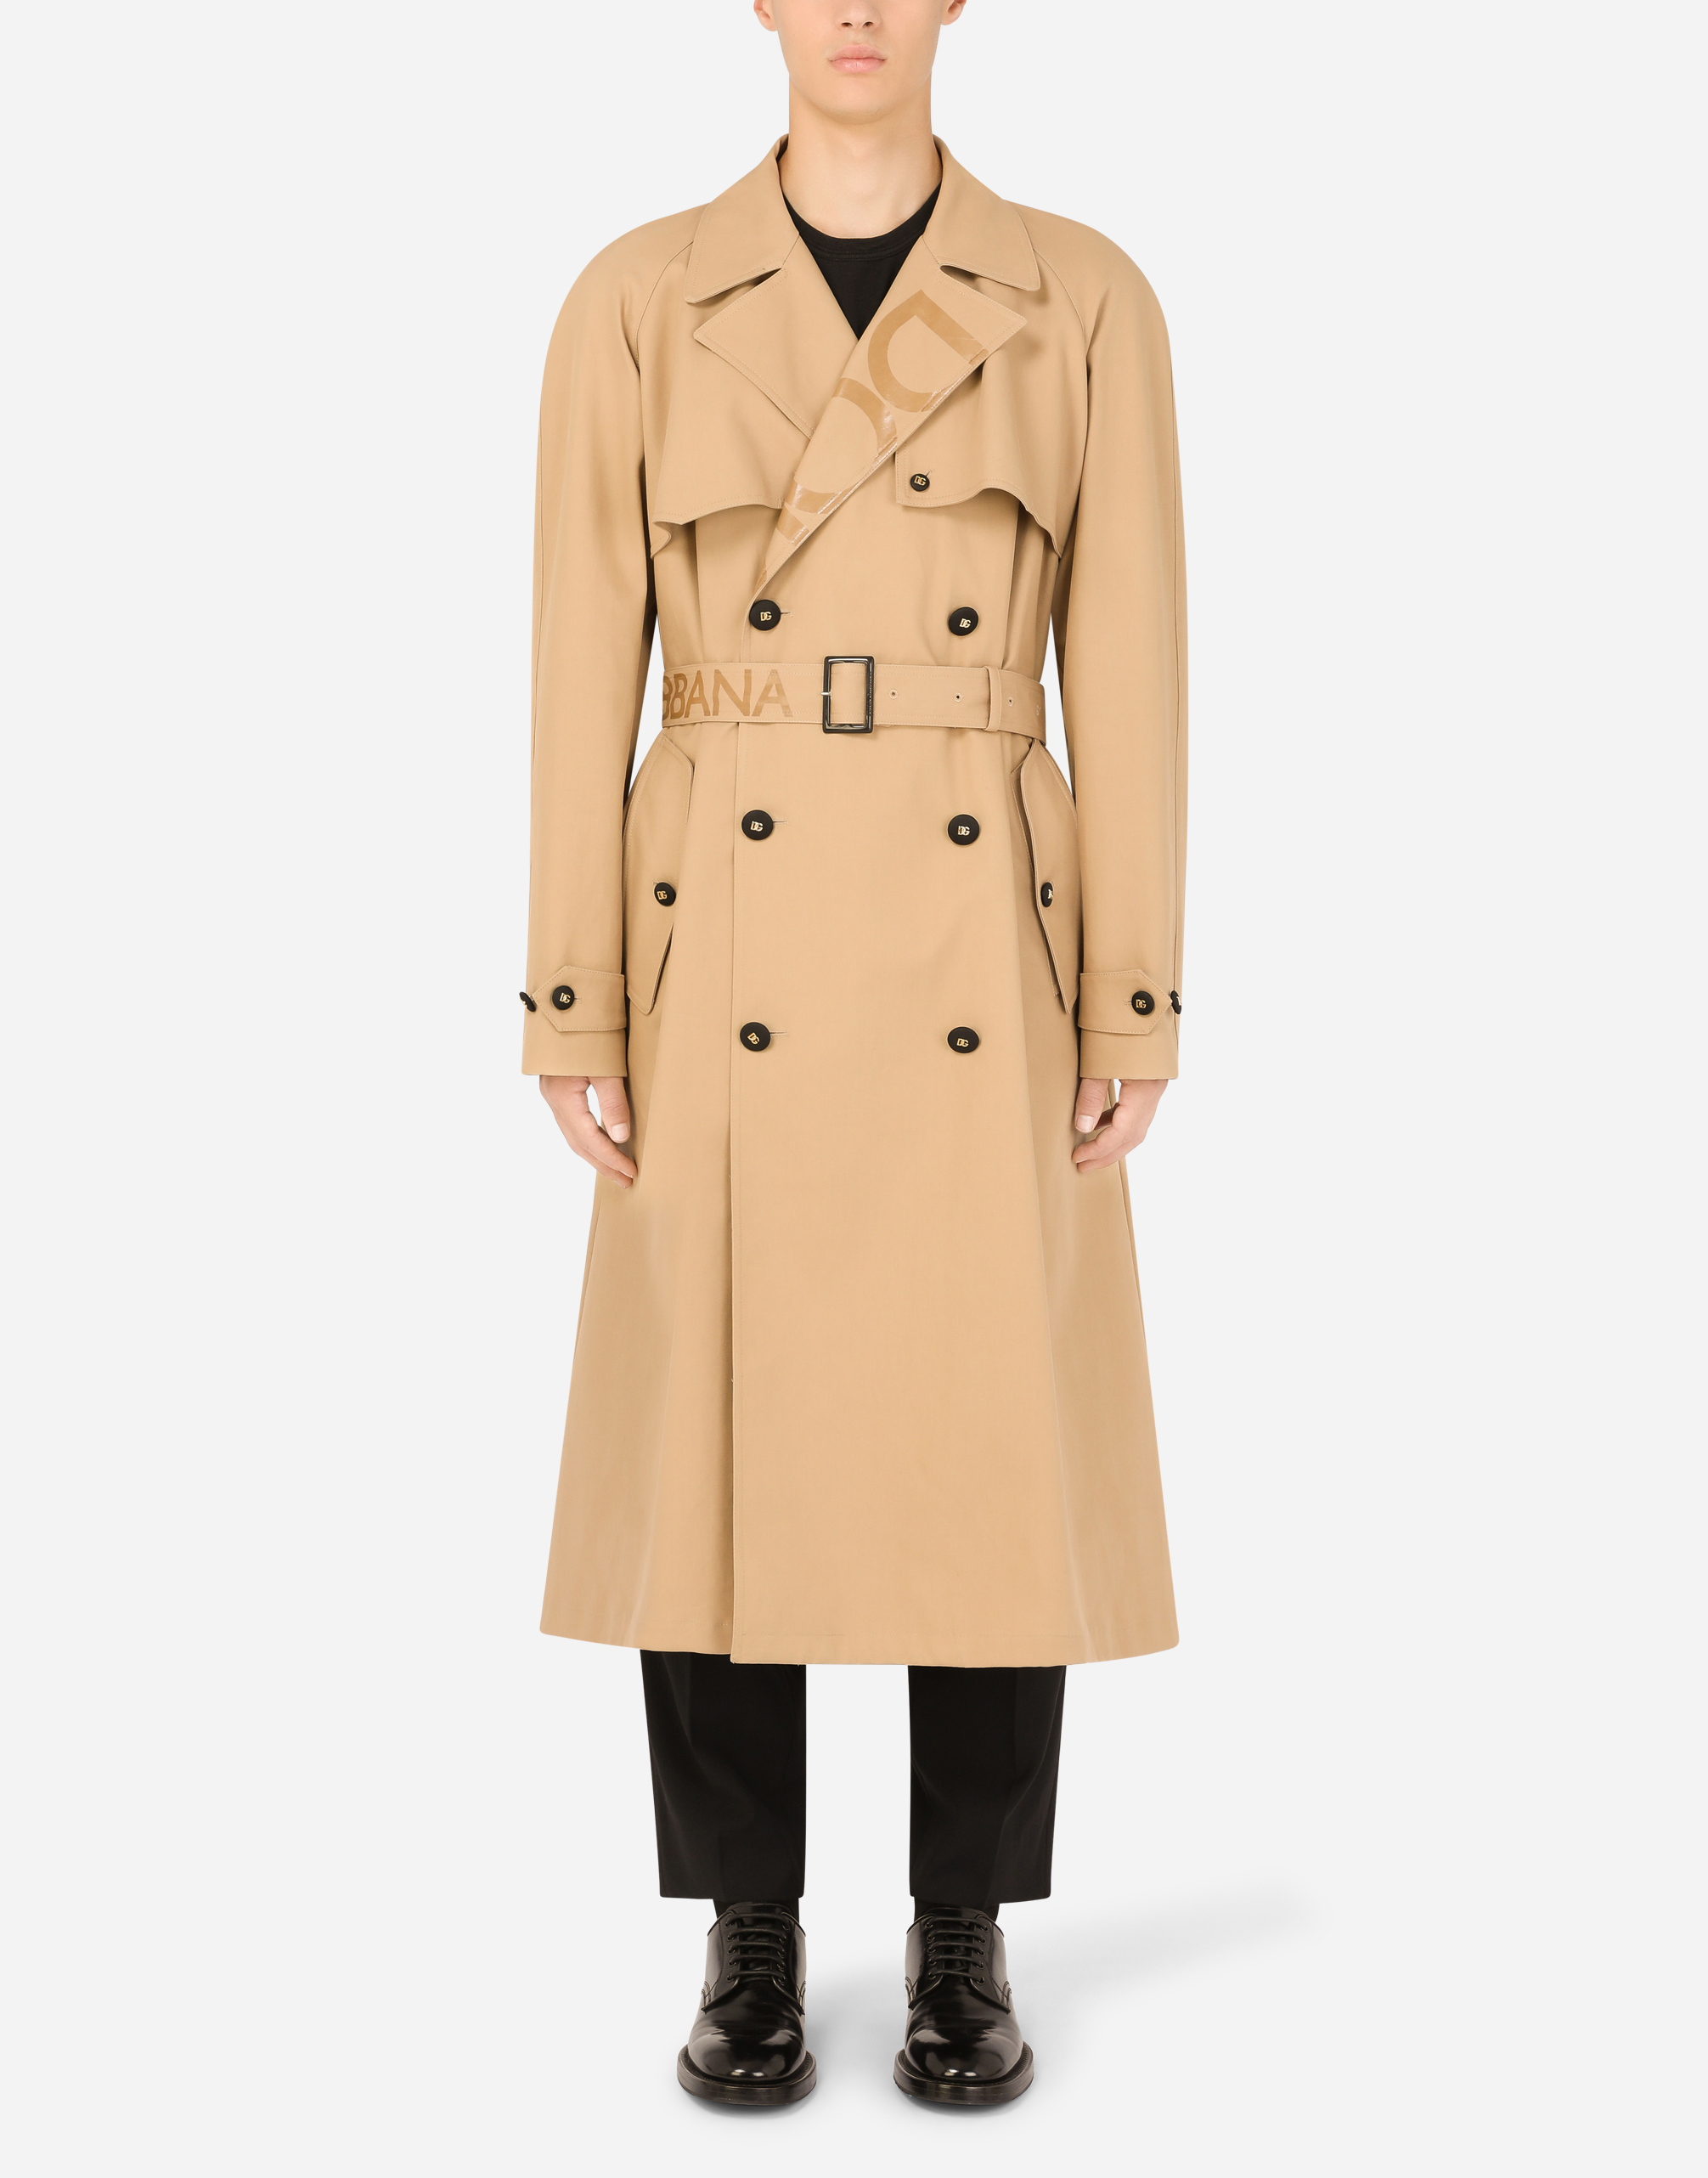 DOLCE & GABBANA COTTON GABARDINE DOUBLE-BREASTED TRENCH COAT